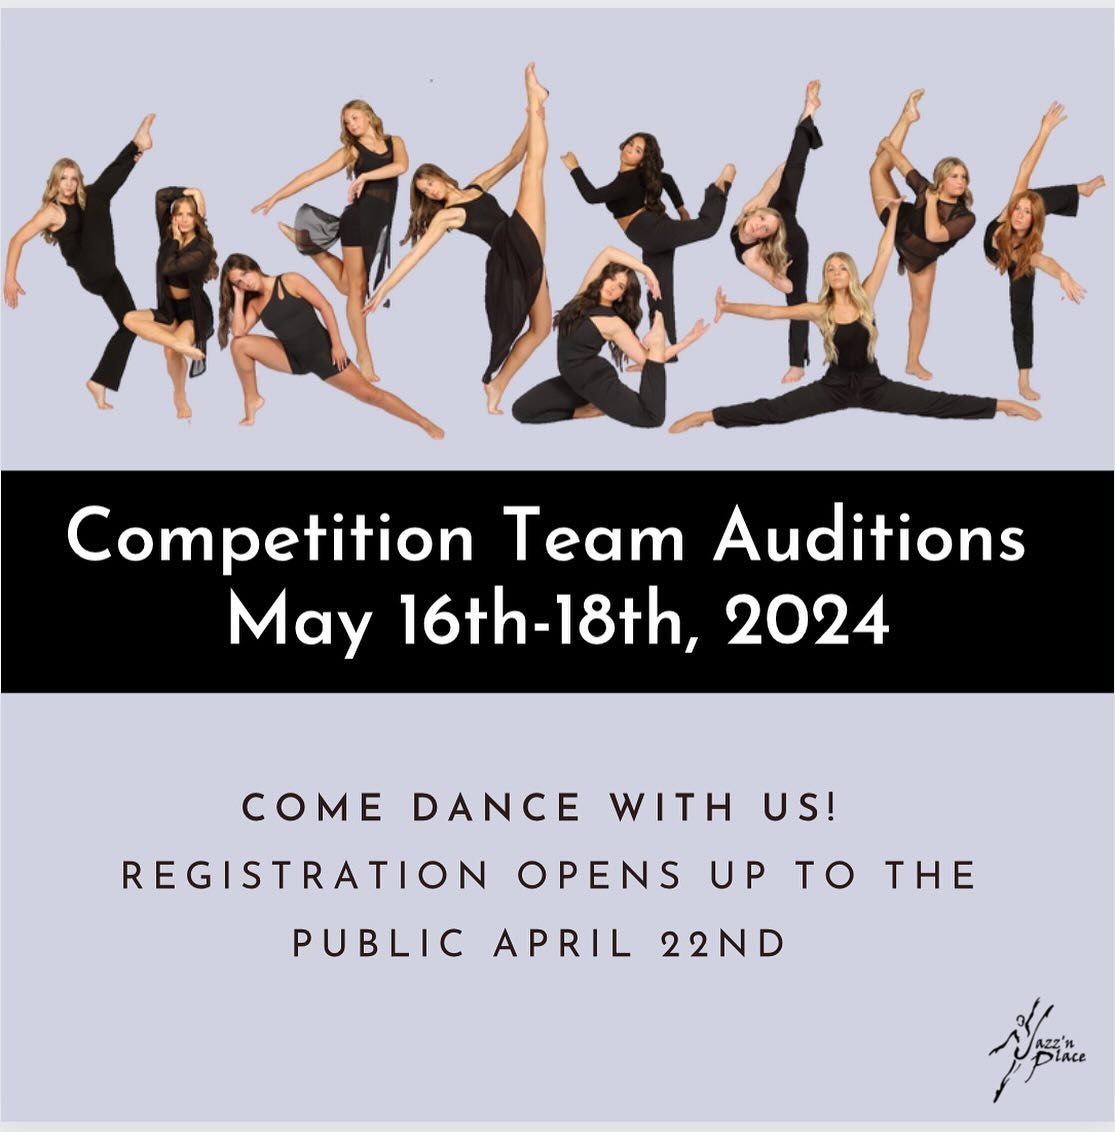 VIP registration opens up this Monday to current students for a discount off the registration fee and to the public April 22nd ✨

DM for open technique and ballet classes to help prepare for auditions. 💃✨

#jnpdancers #utahdancers #utahdancestudios 